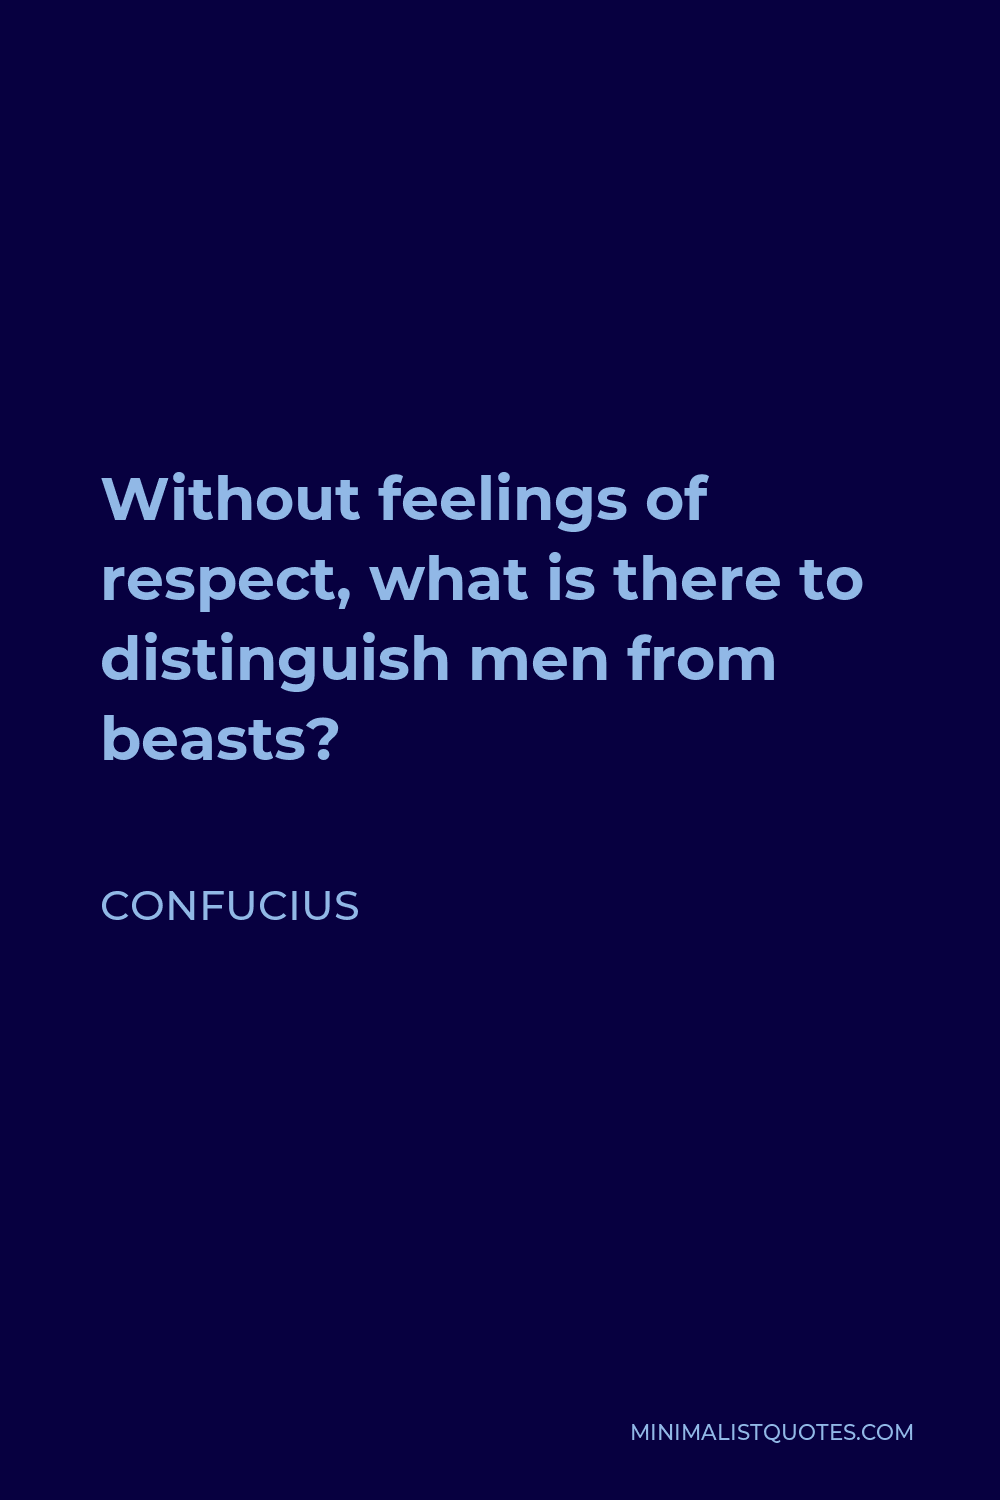 Confucius Quote - Without feelings of respect, what is there to distinguish men from beasts?